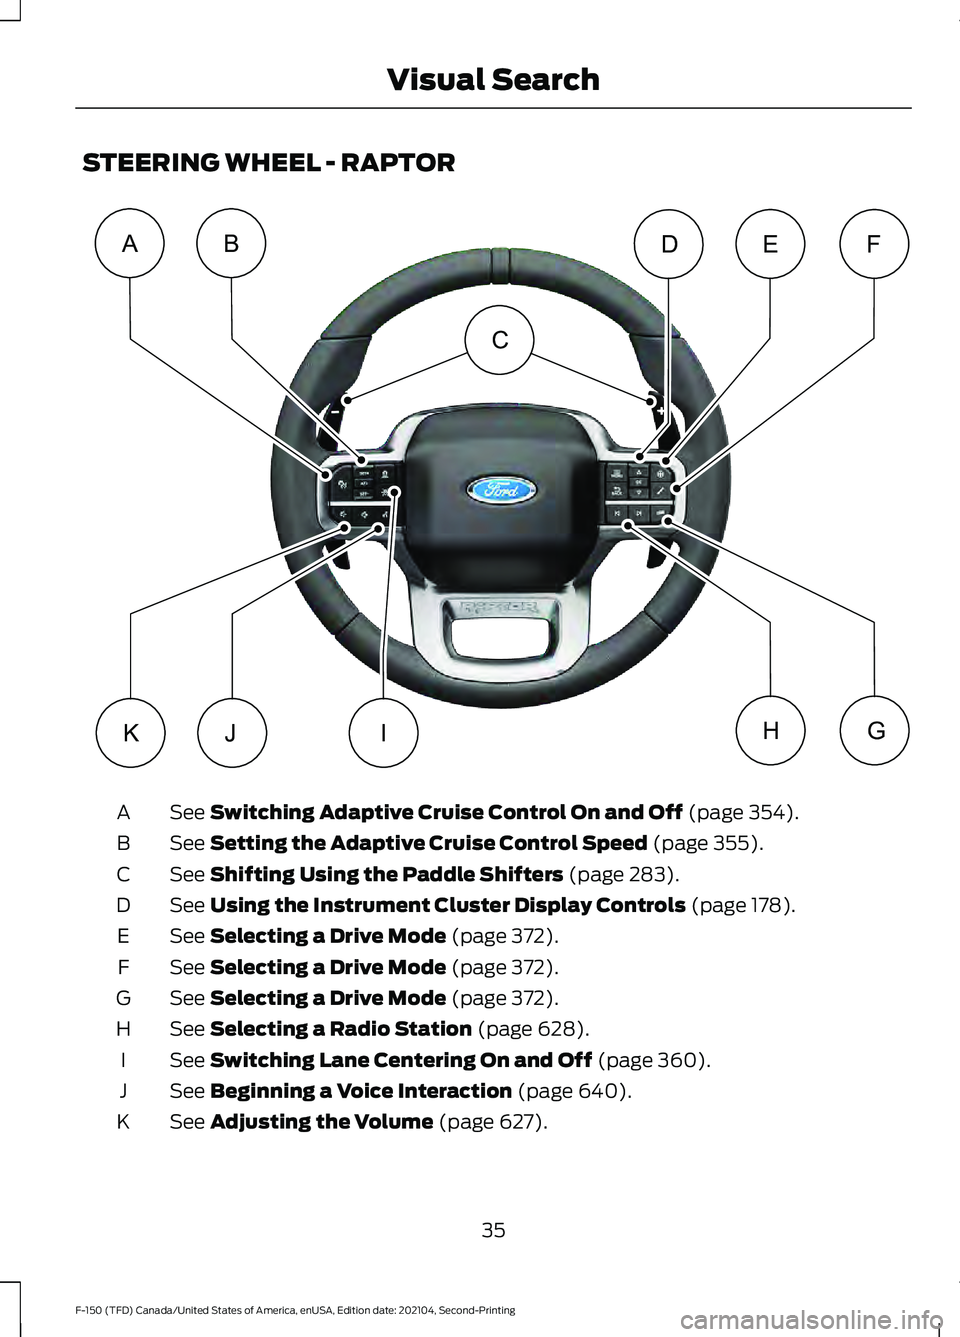 FORD F-150 2021  Owners Manual STEERING WHEEL - RAPTOR
See Switching Adaptive Cruise Control On and Off (page 354).
A
See 
Setting the Adaptive Cruise Control Speed (page 355).
B
See 
Shifting Using the Paddle Shifters (page 283).
